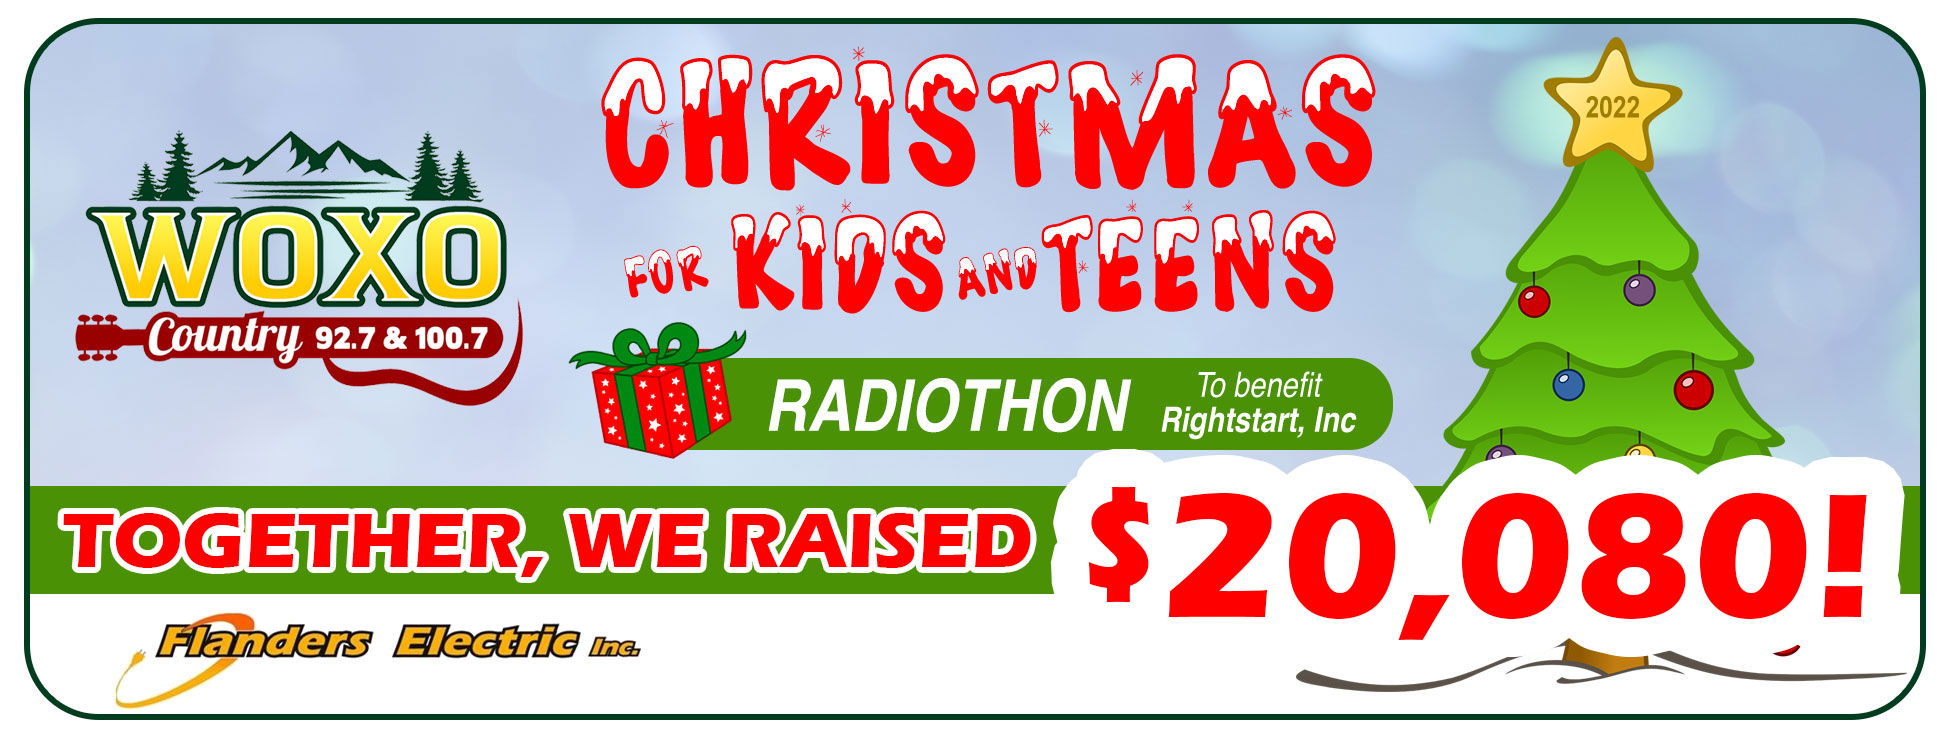 WOXO - Christmas for Kids and Teens Radiothon presented by Flanders Electric